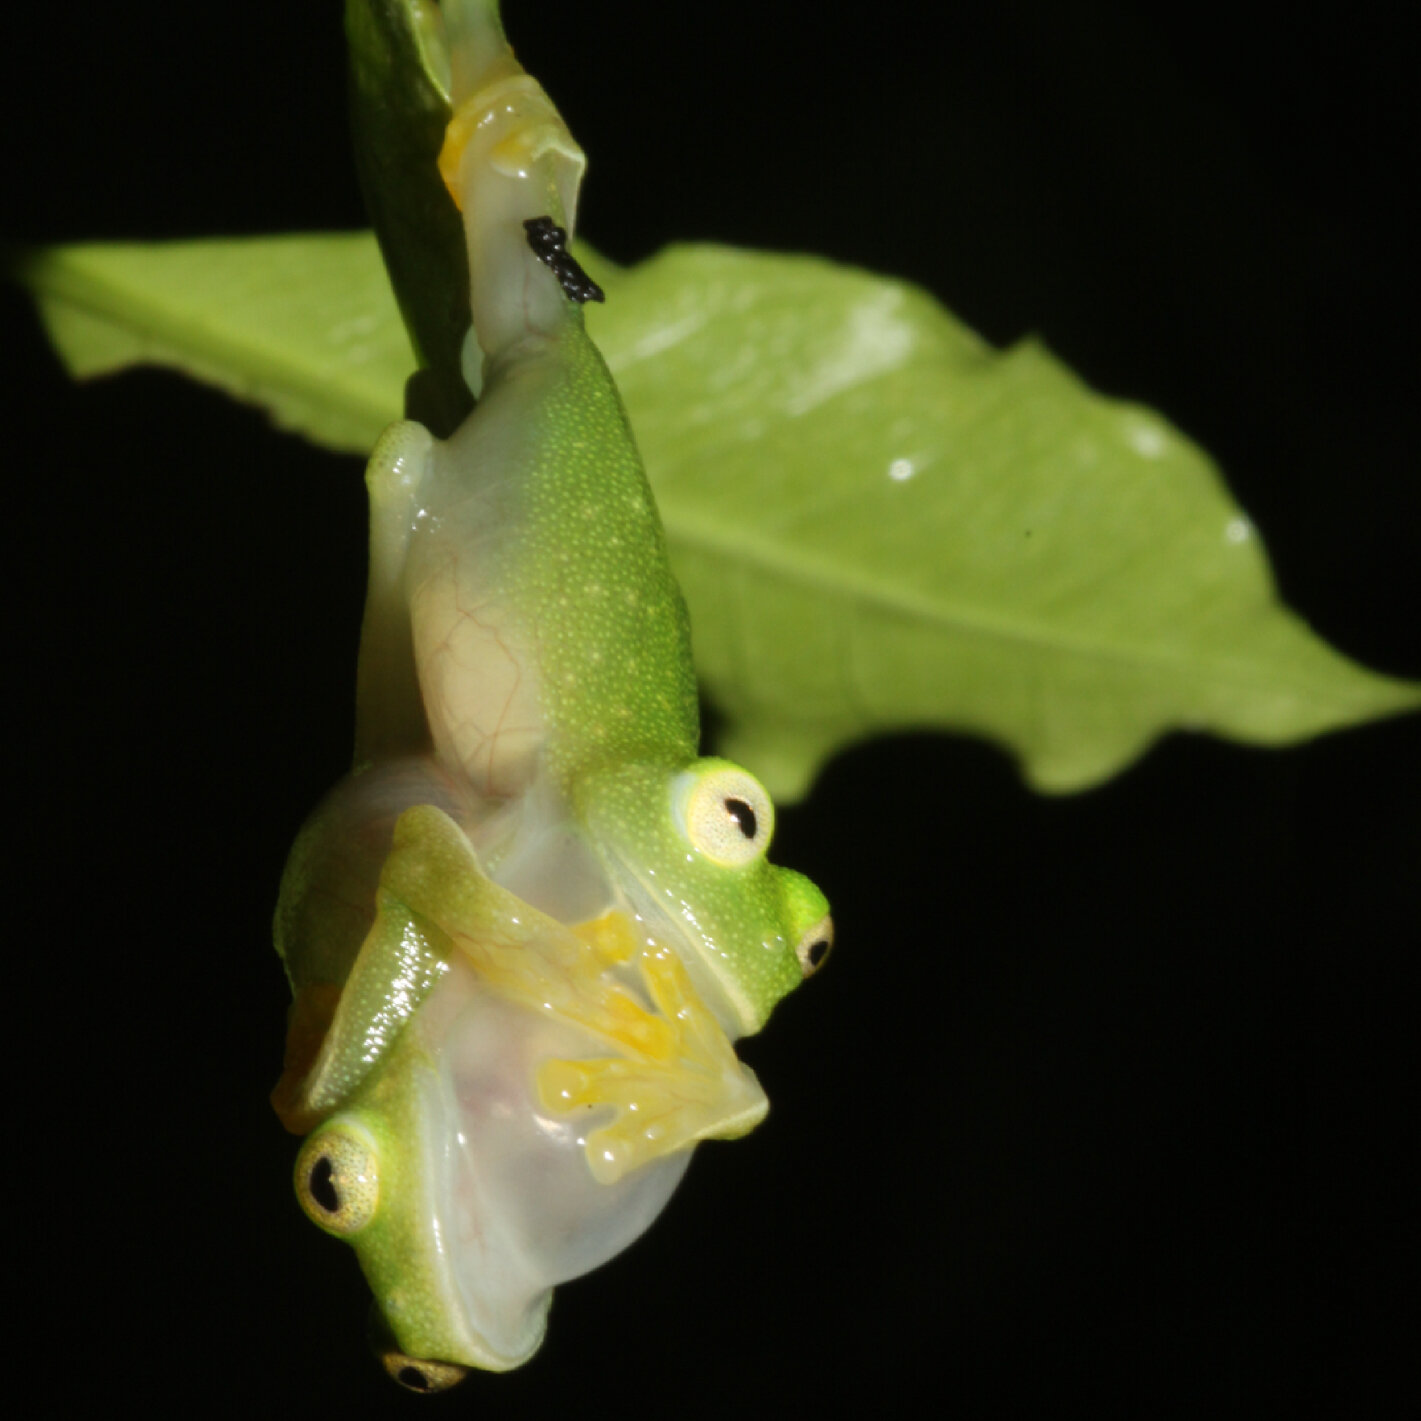 Scientists discover the secret power that makes glass frogs transparent